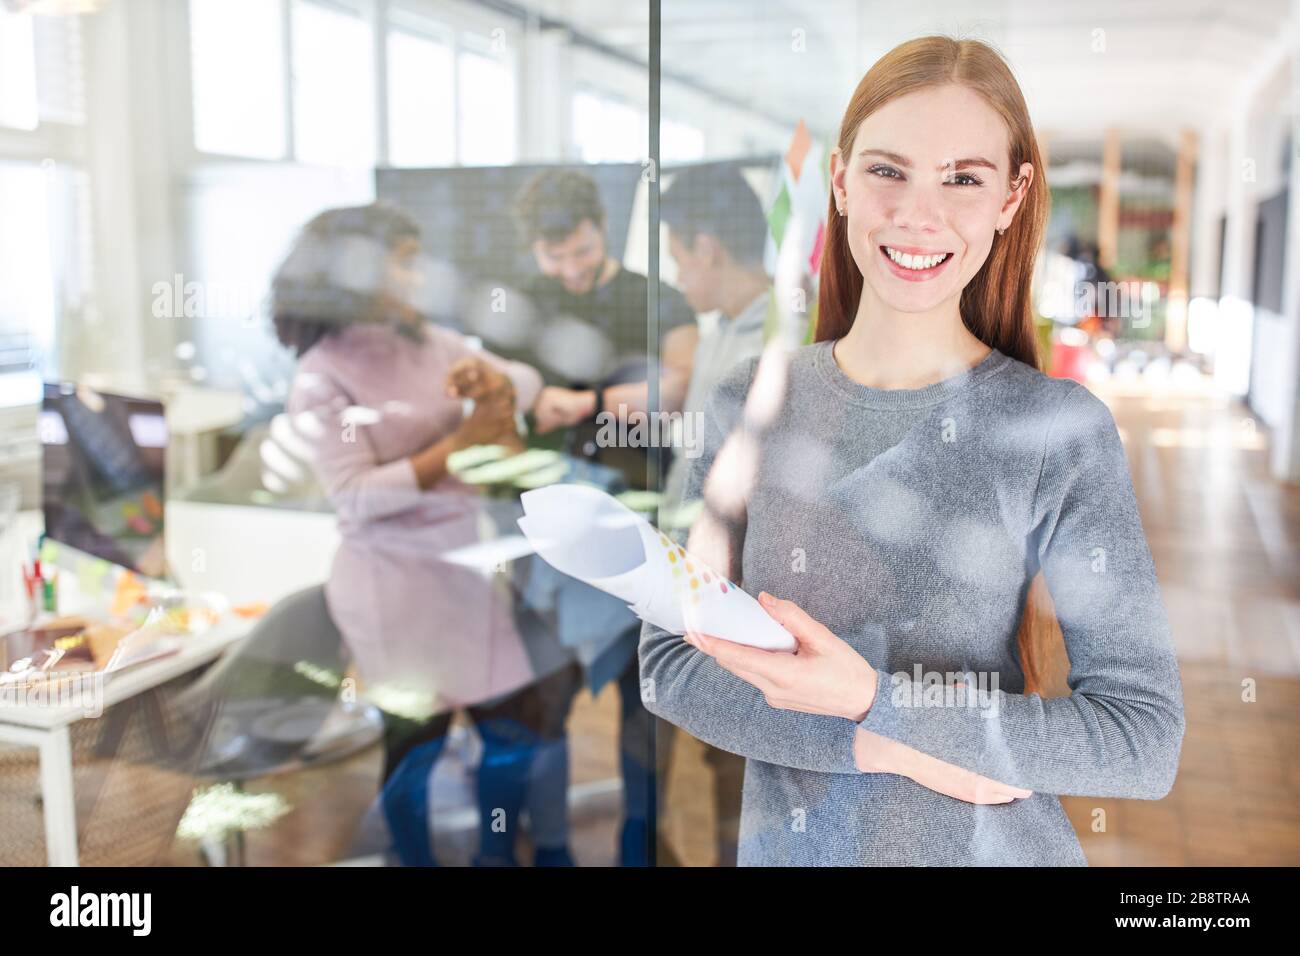 Smiling young woman as a trainee or trainee for feminism and equality Stock Photo